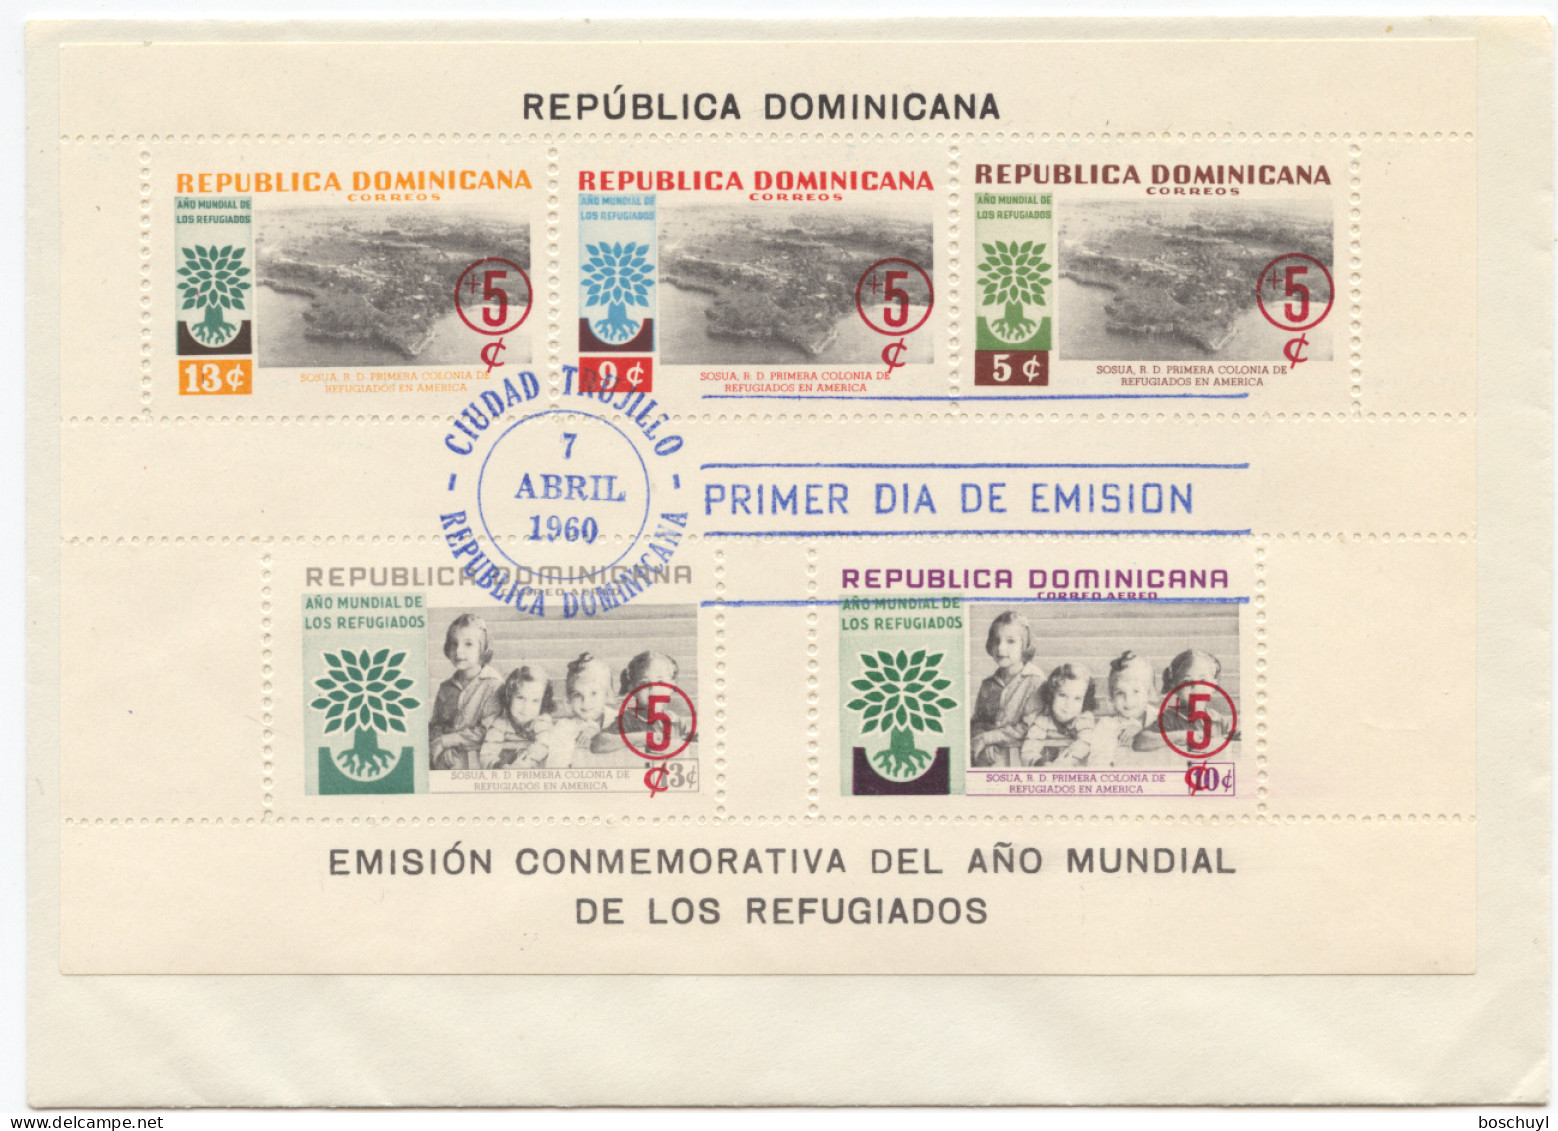 Dominican Republic, 1960, World Refugee Year, WRY, United Nations, Overprinted, On Cover, FD Cancelled, Michel Block 24A - Refugees